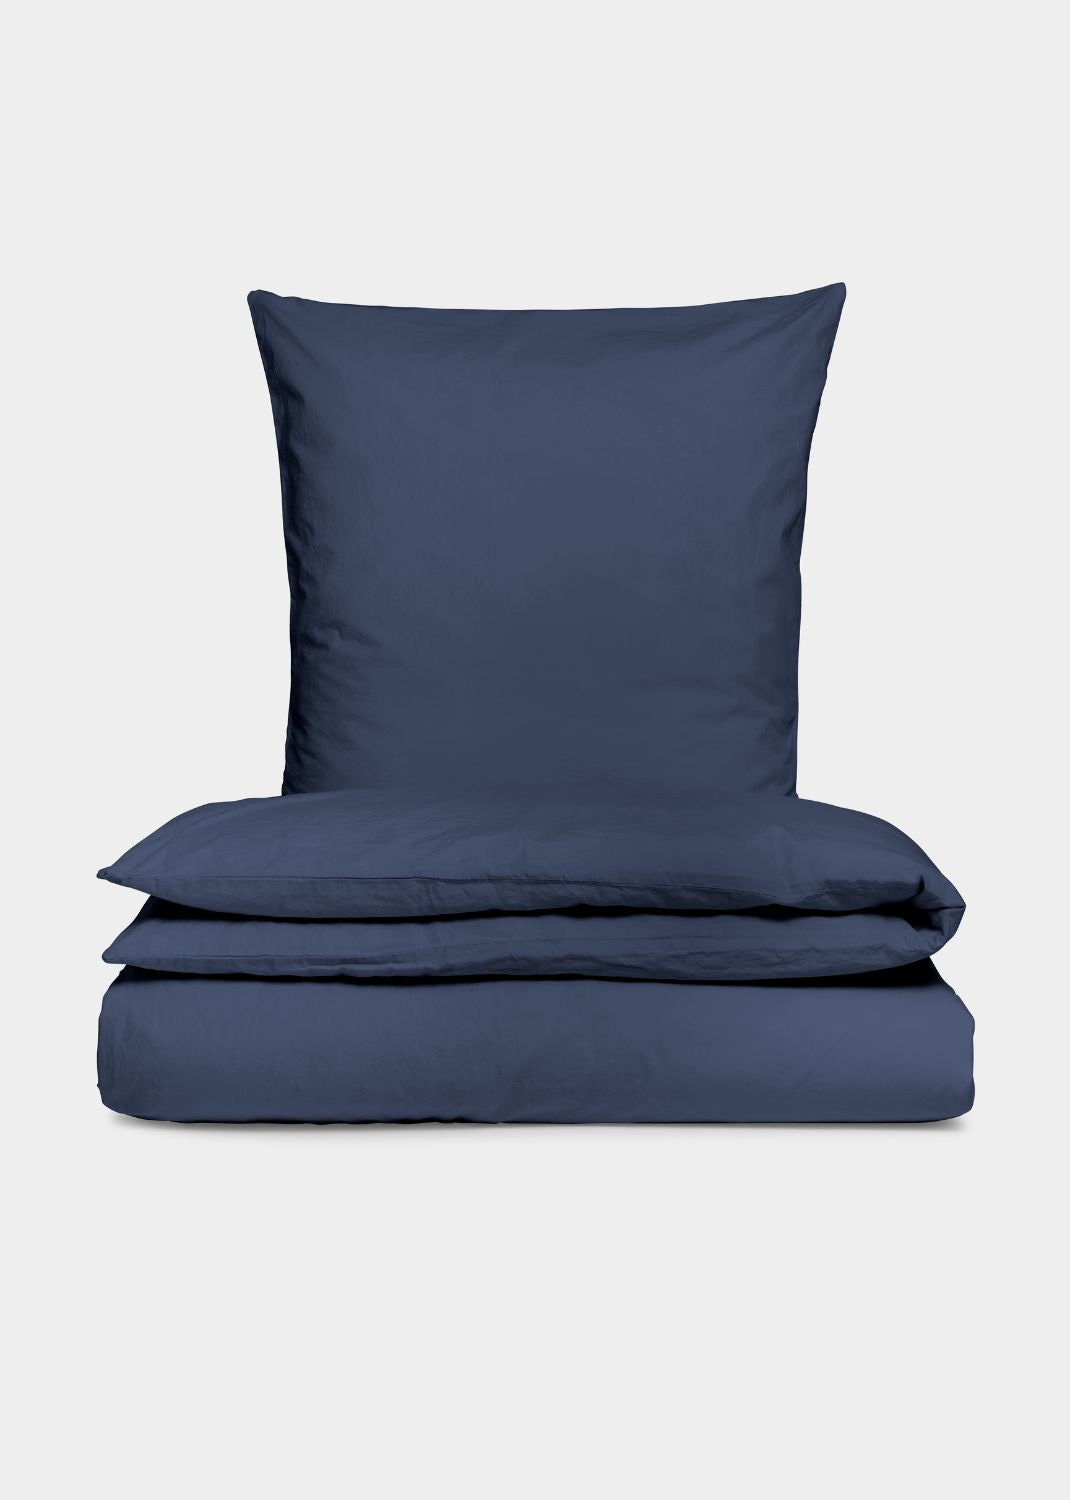 Cotton percale bed set - Navy blue